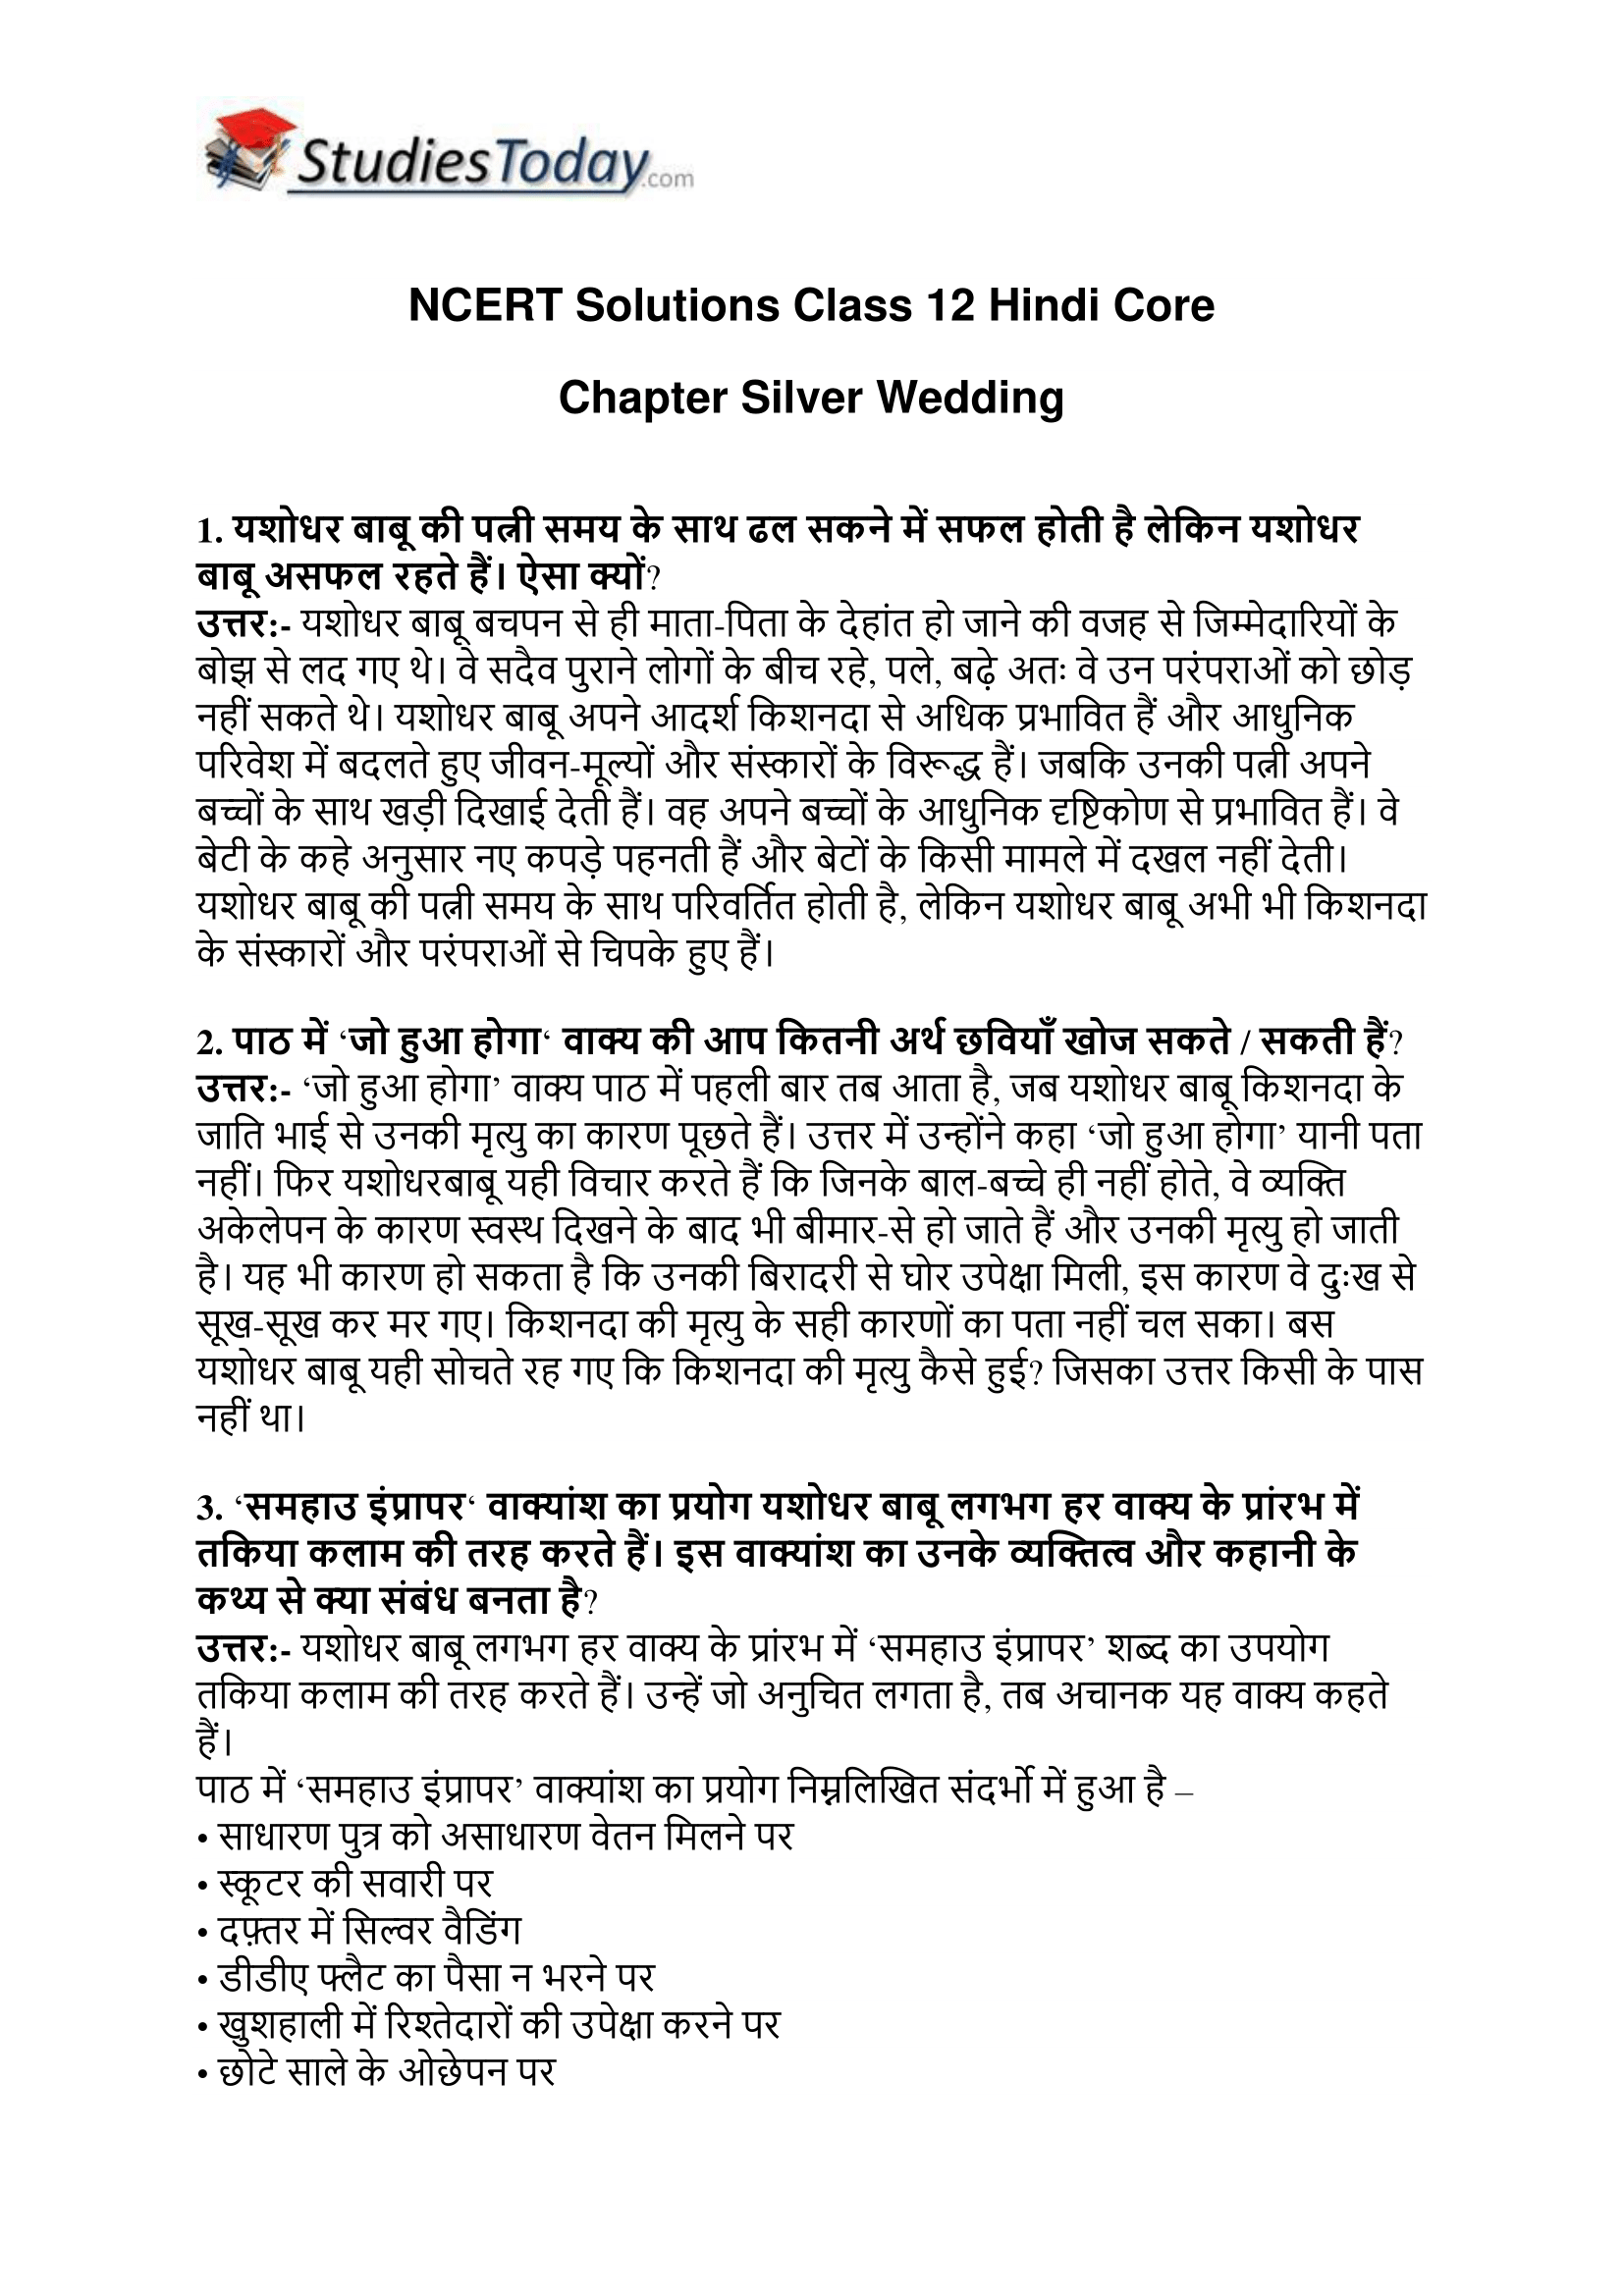 ncert-solutions-class-12-hindi-core-chapter-silver-wedding-1